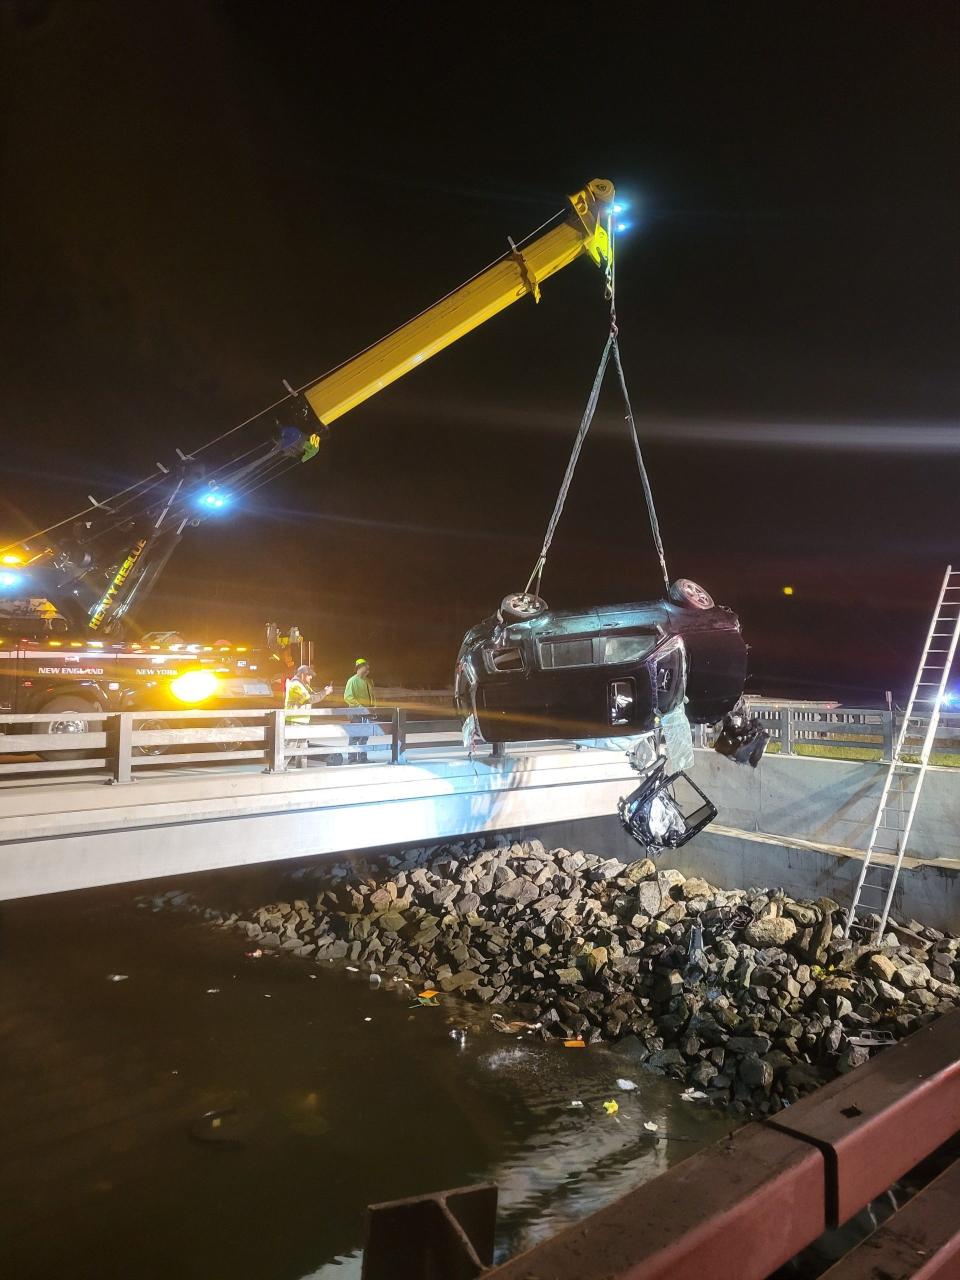 On arrival, troopers located a 2015 Honda Pilot heavily damaged lying on its side and partially submerged in the river. They determined the Honda was traveling southbound when the car left the roadway and traveled into the median for an unknown reason.